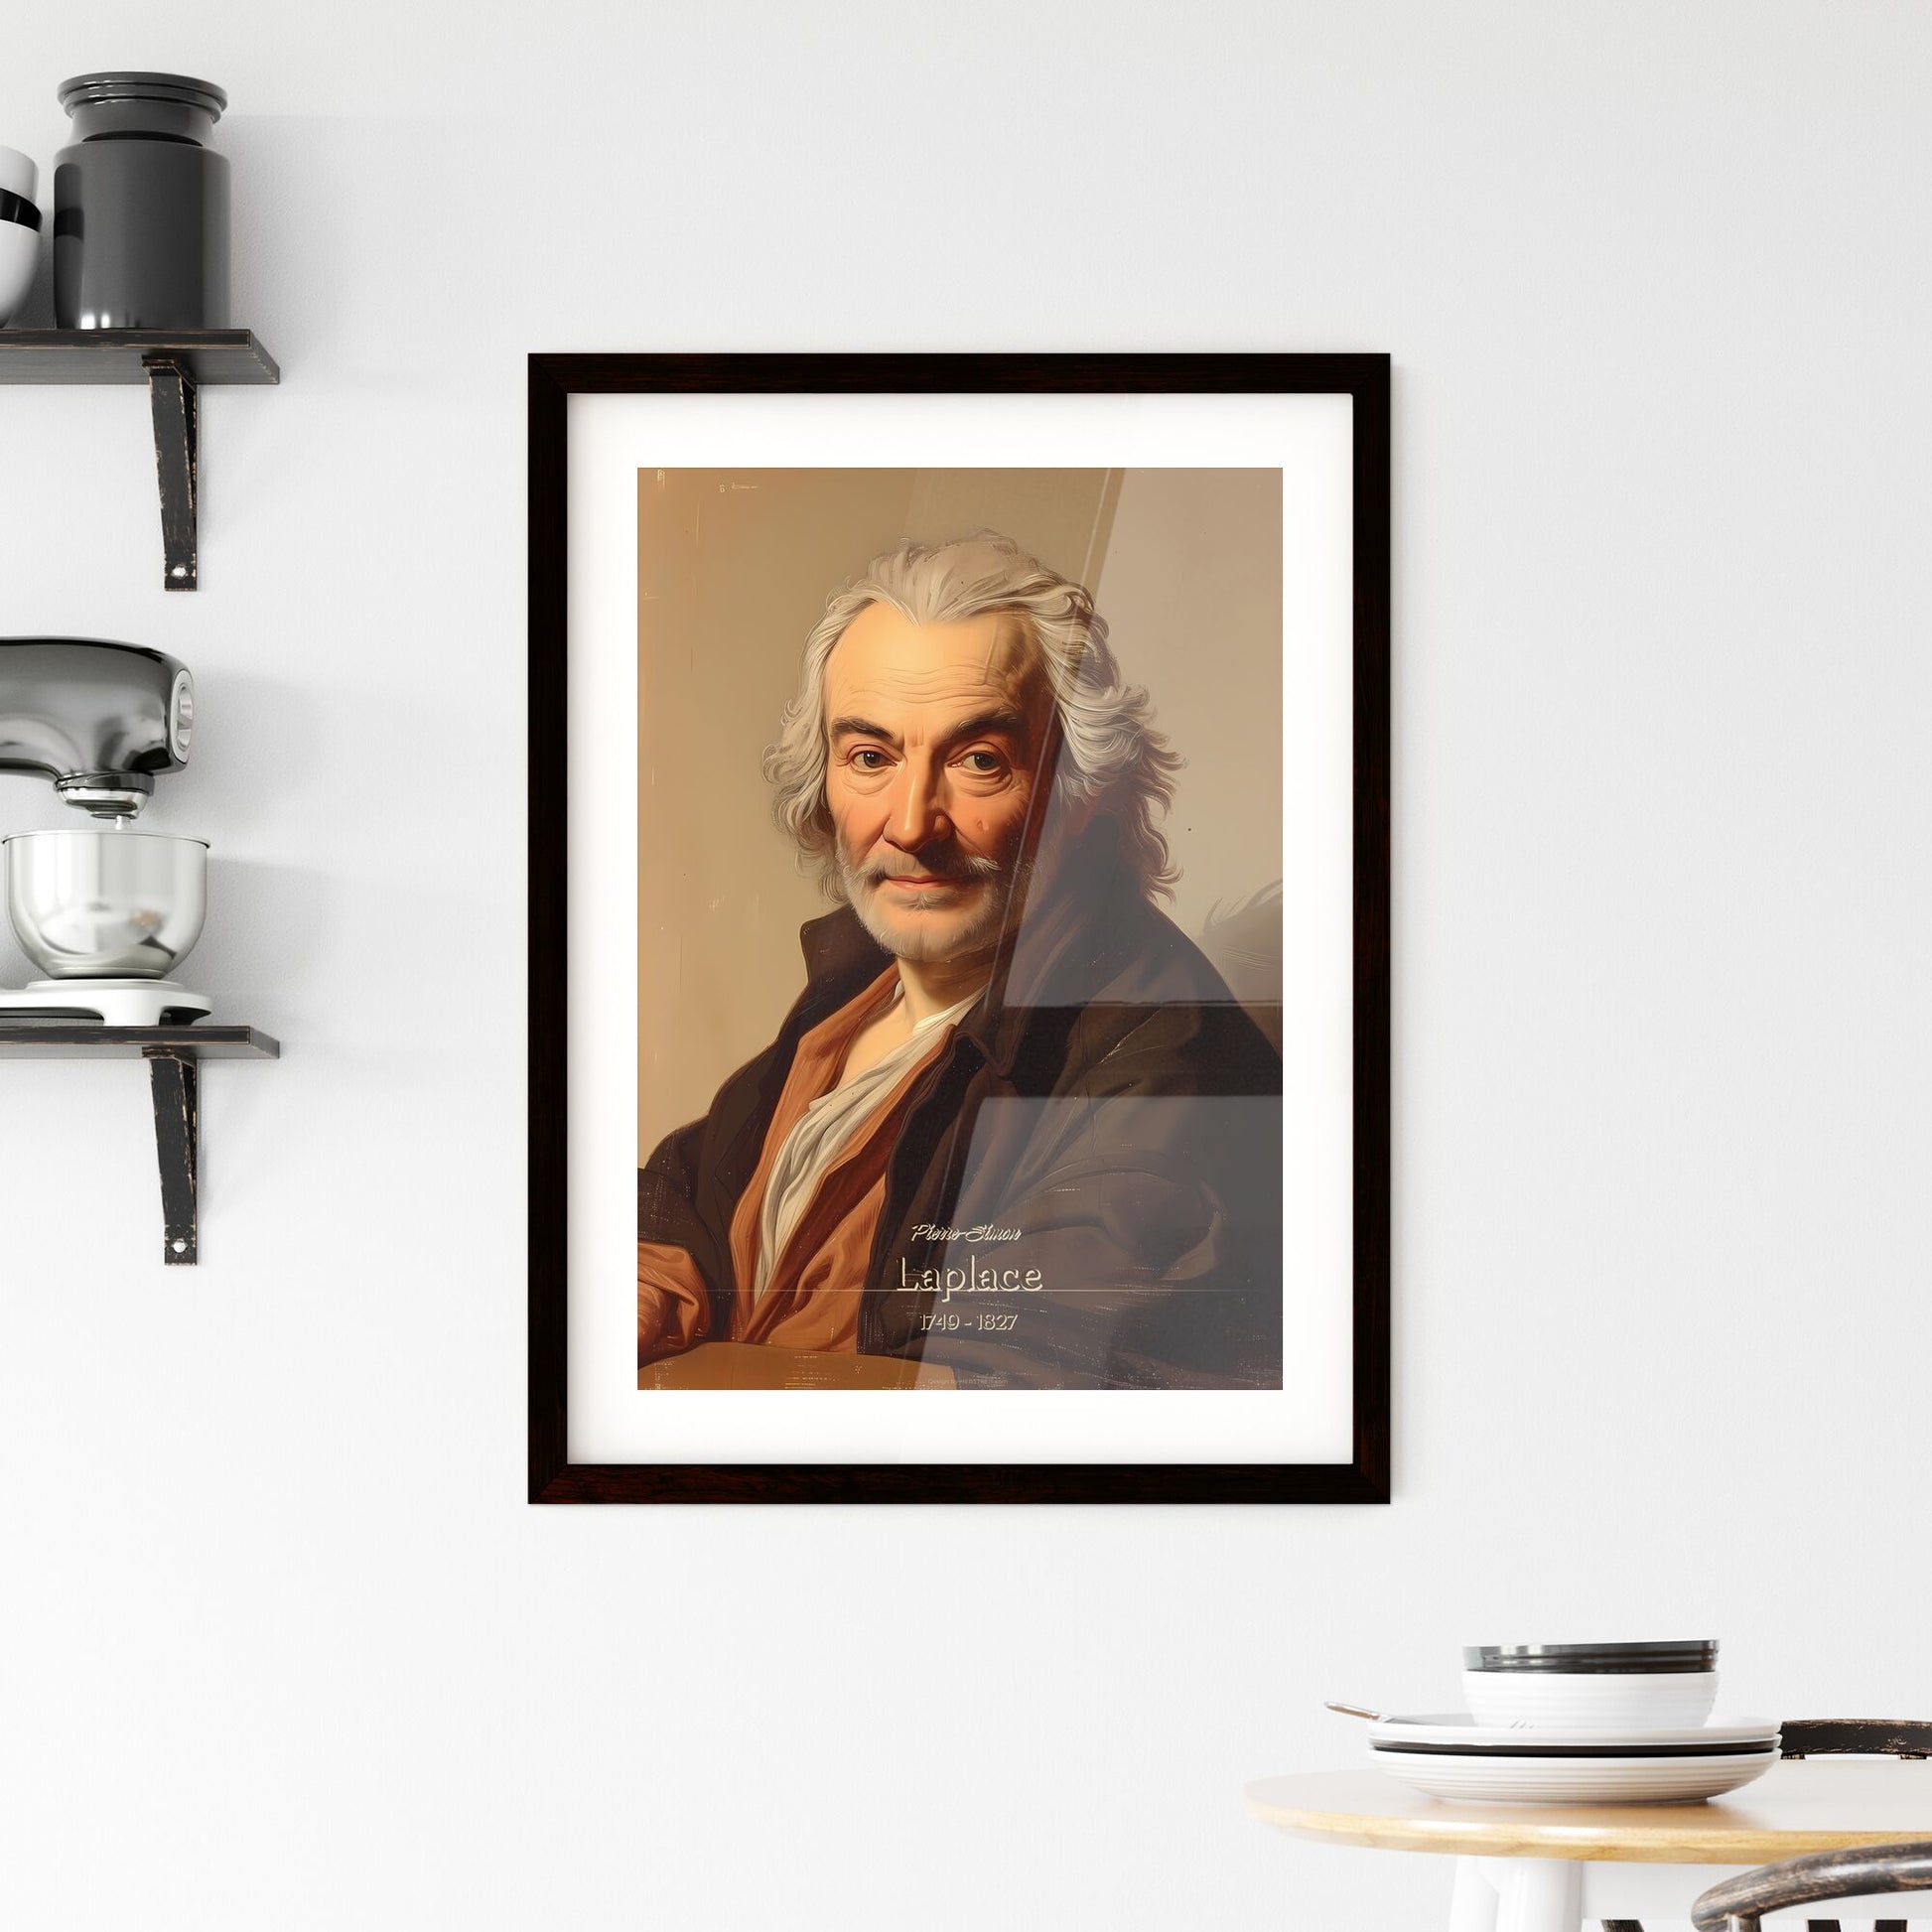 Pierre-Simon, Laplace, 1749 - 1827, A Poster of a man with white hair and beard Default Title